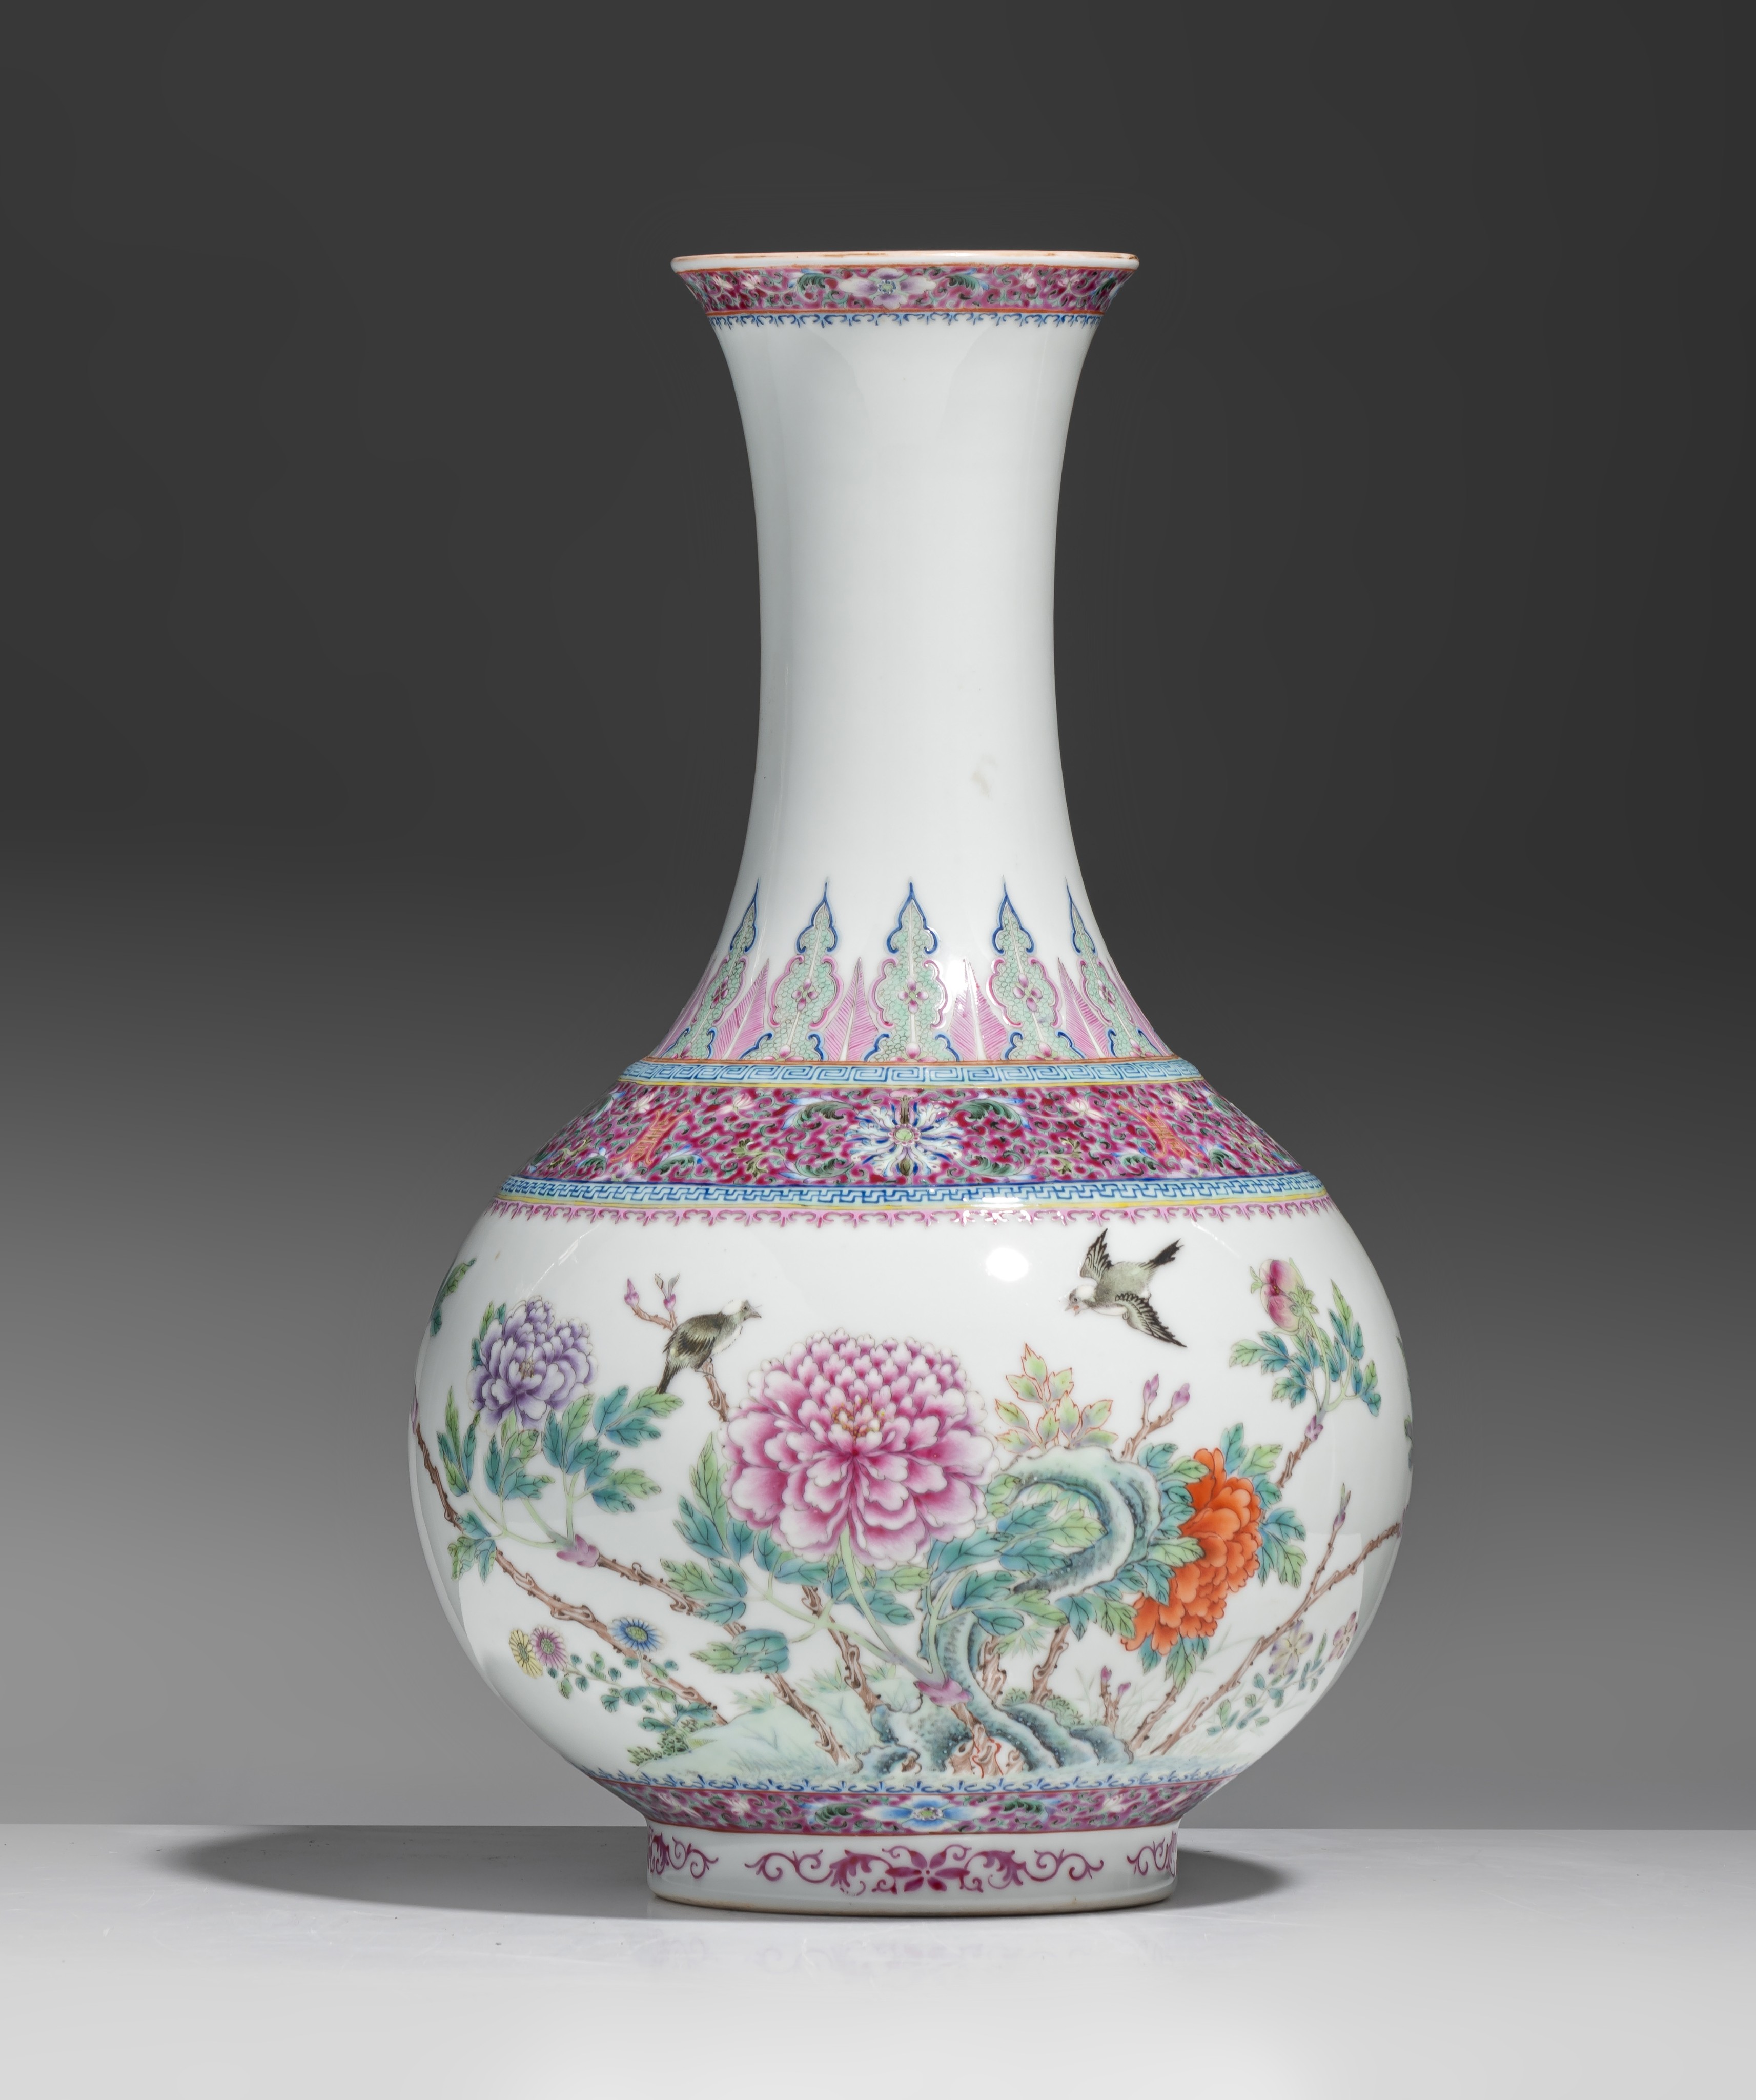 A fine Chinese famille rose 'Birds and Flowers' bottle vase, with a Qianlong mark, Republic period,